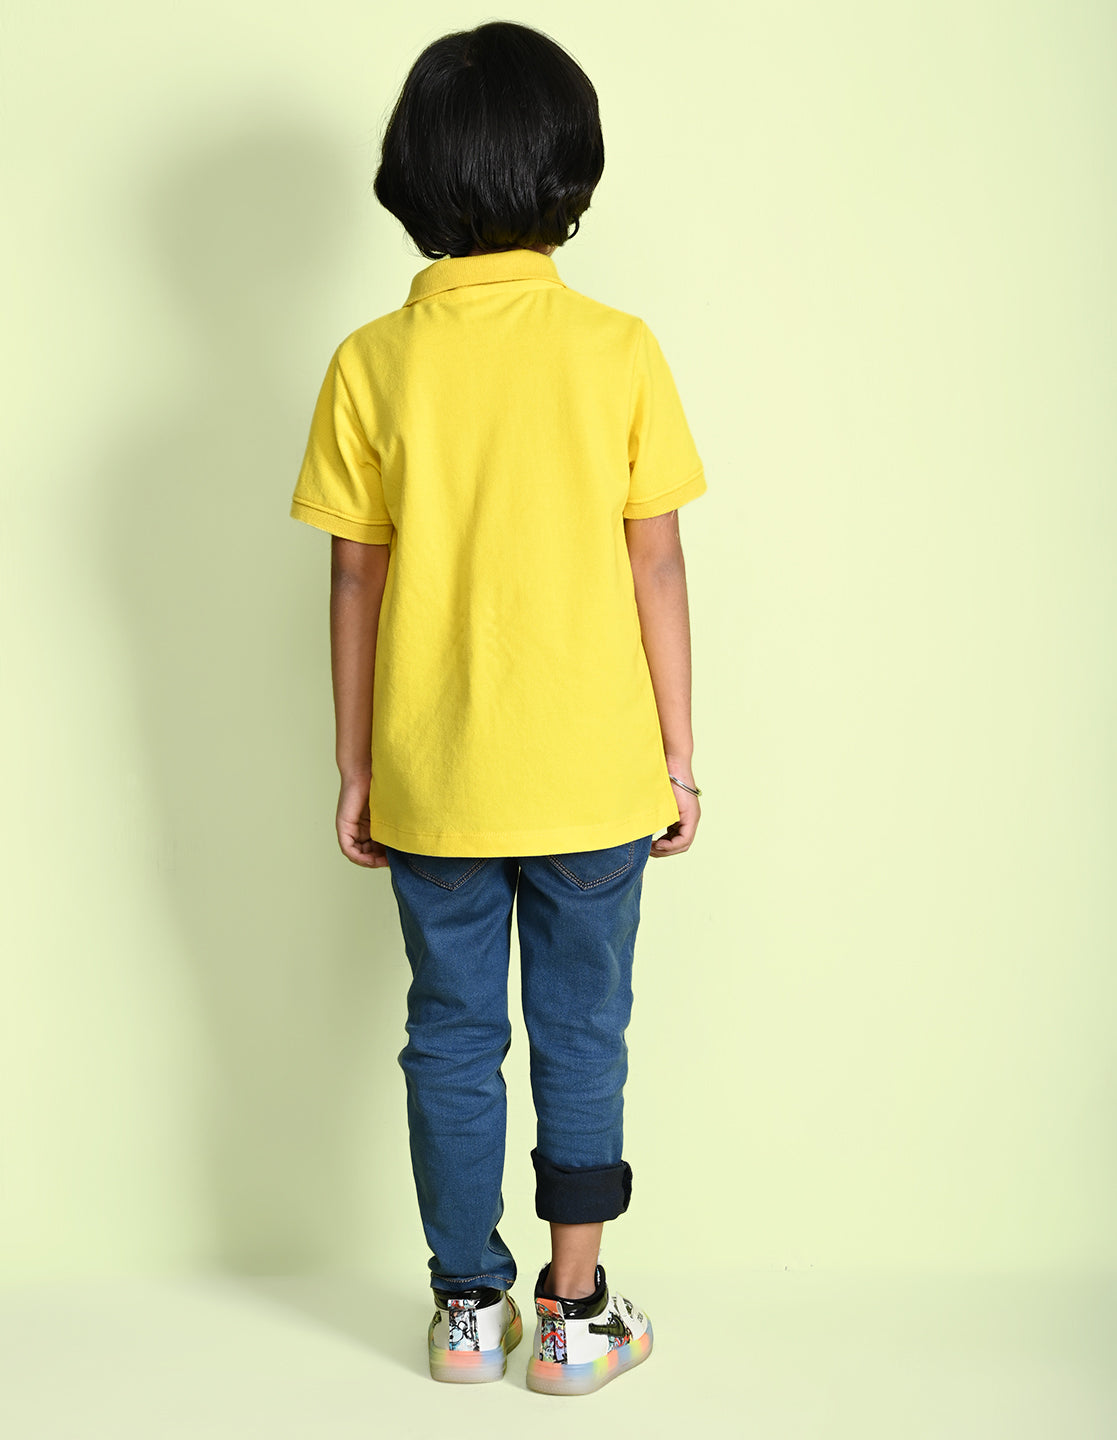 Nusyl Number 2 Printed Bright Yellow Boys polo T-shirts